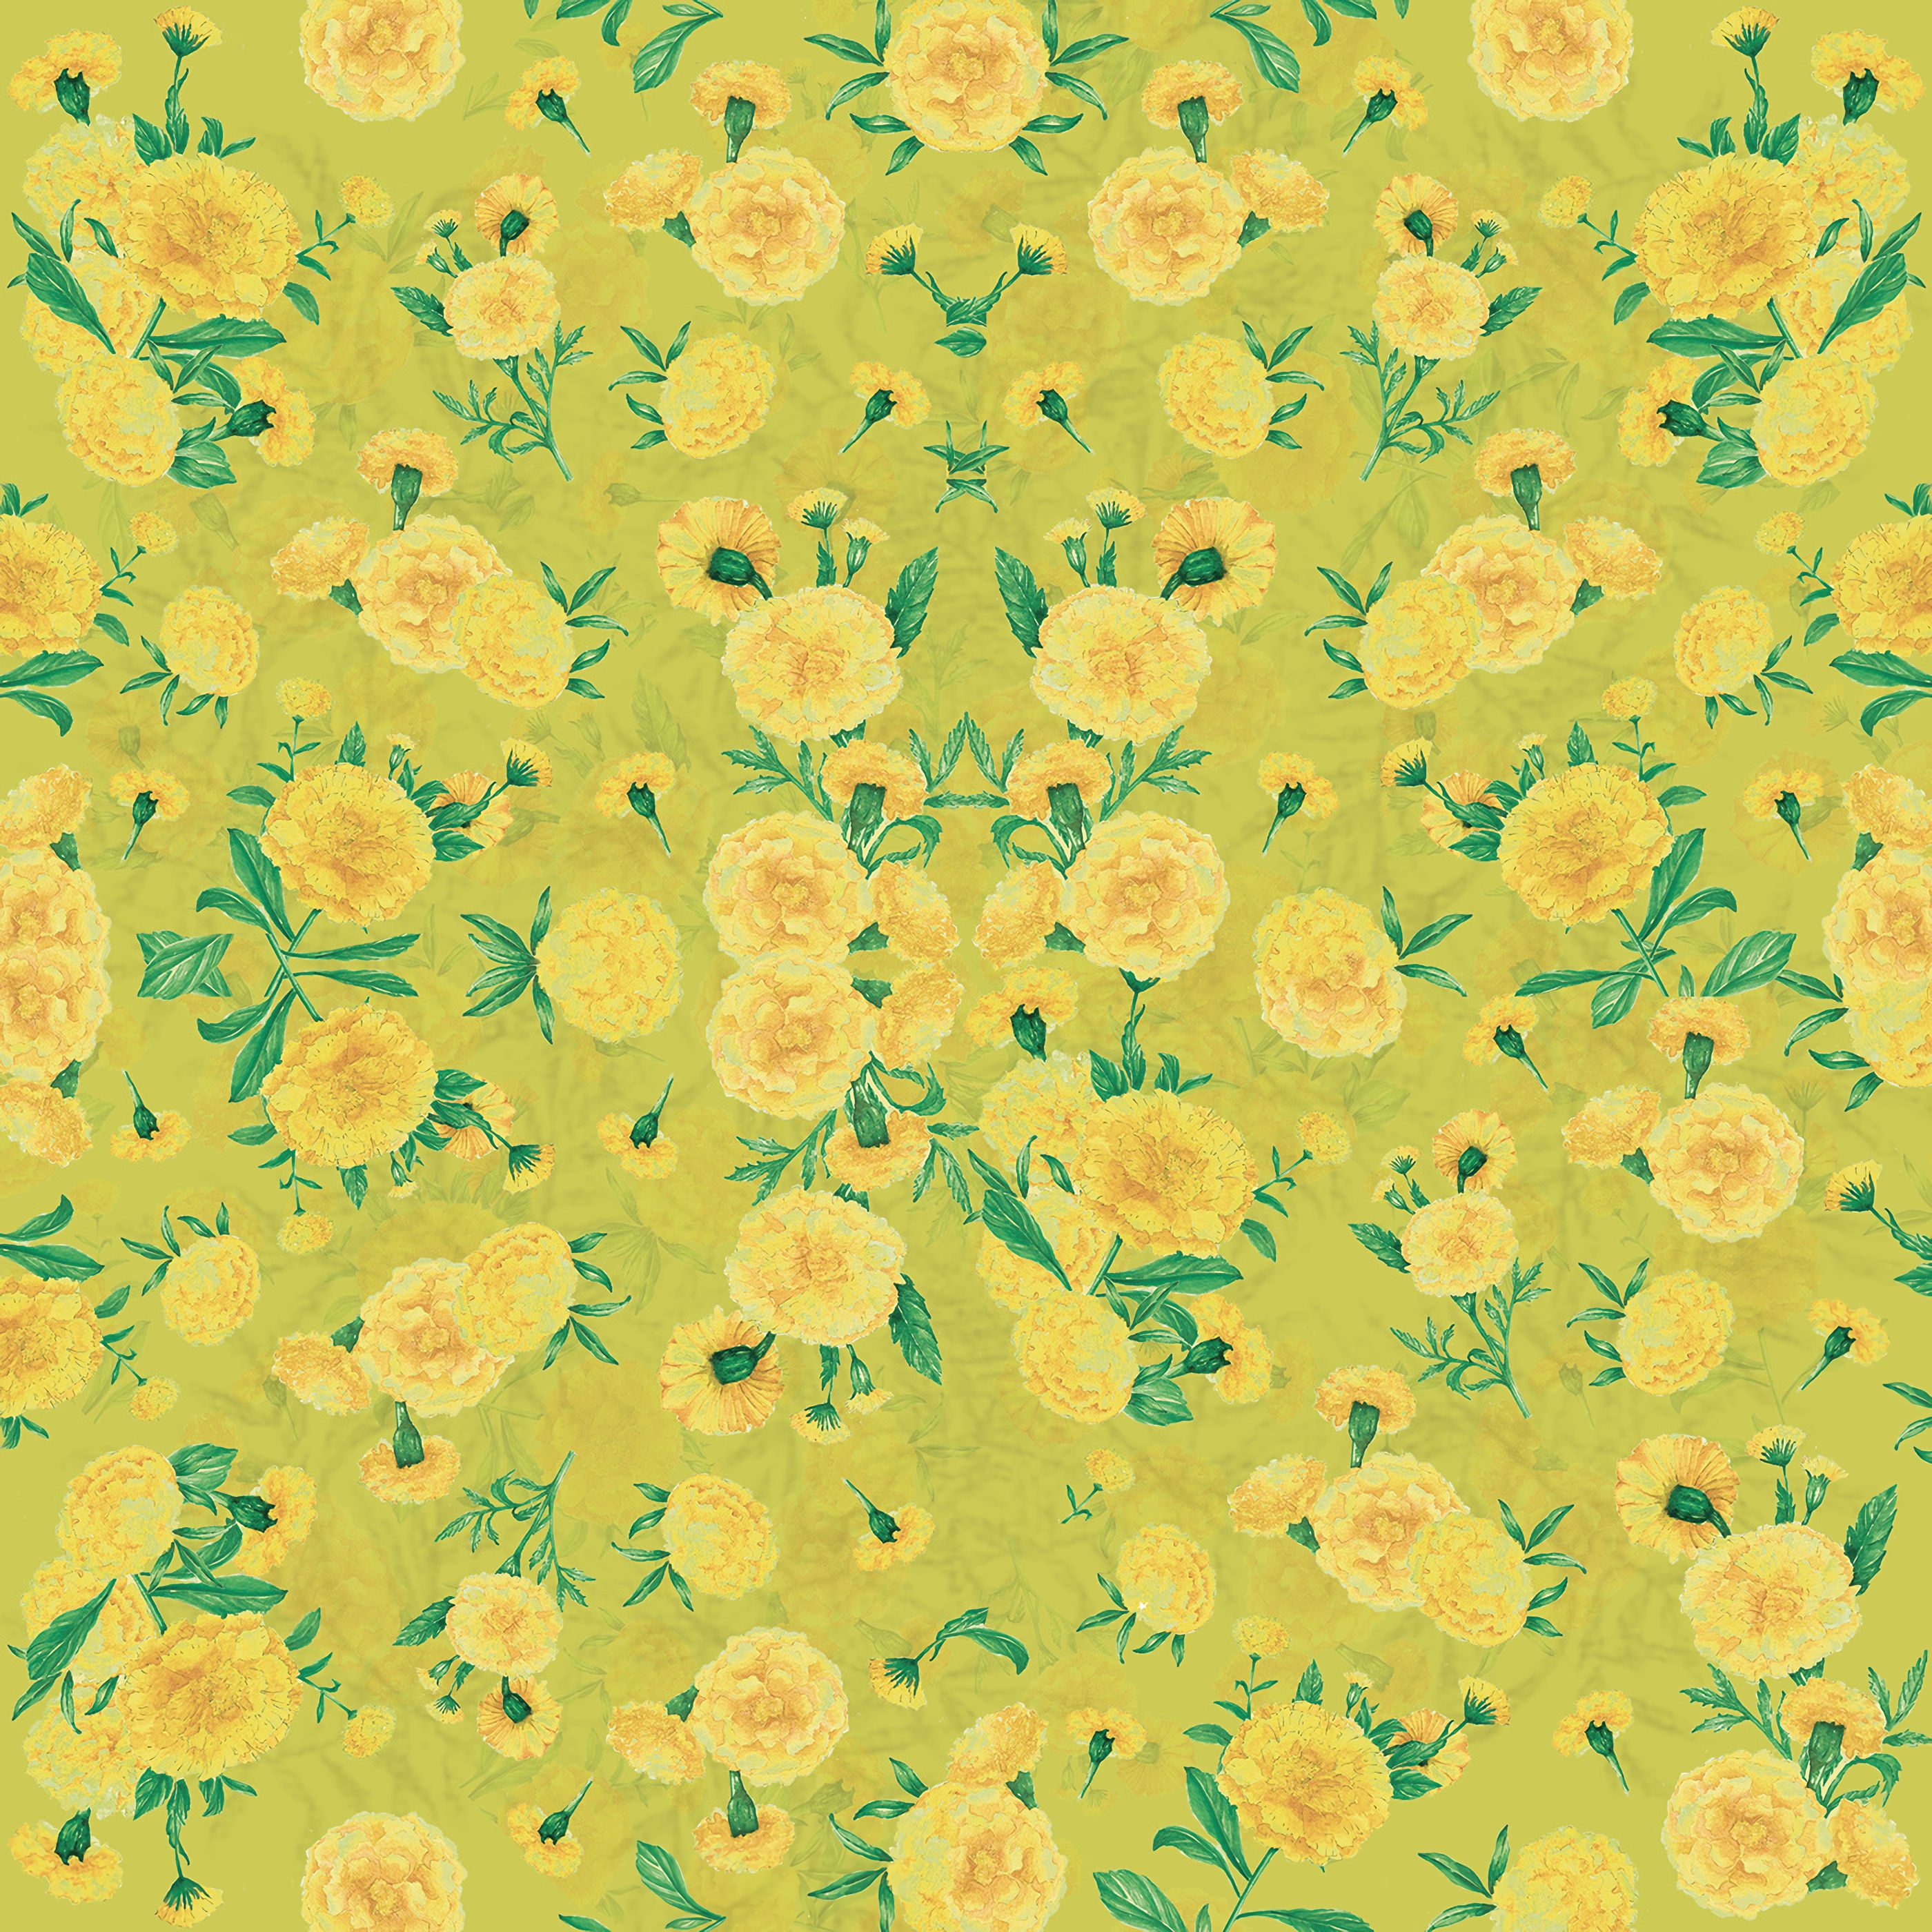 4K, FHD, UHD patterns, flowers, texture, yellow